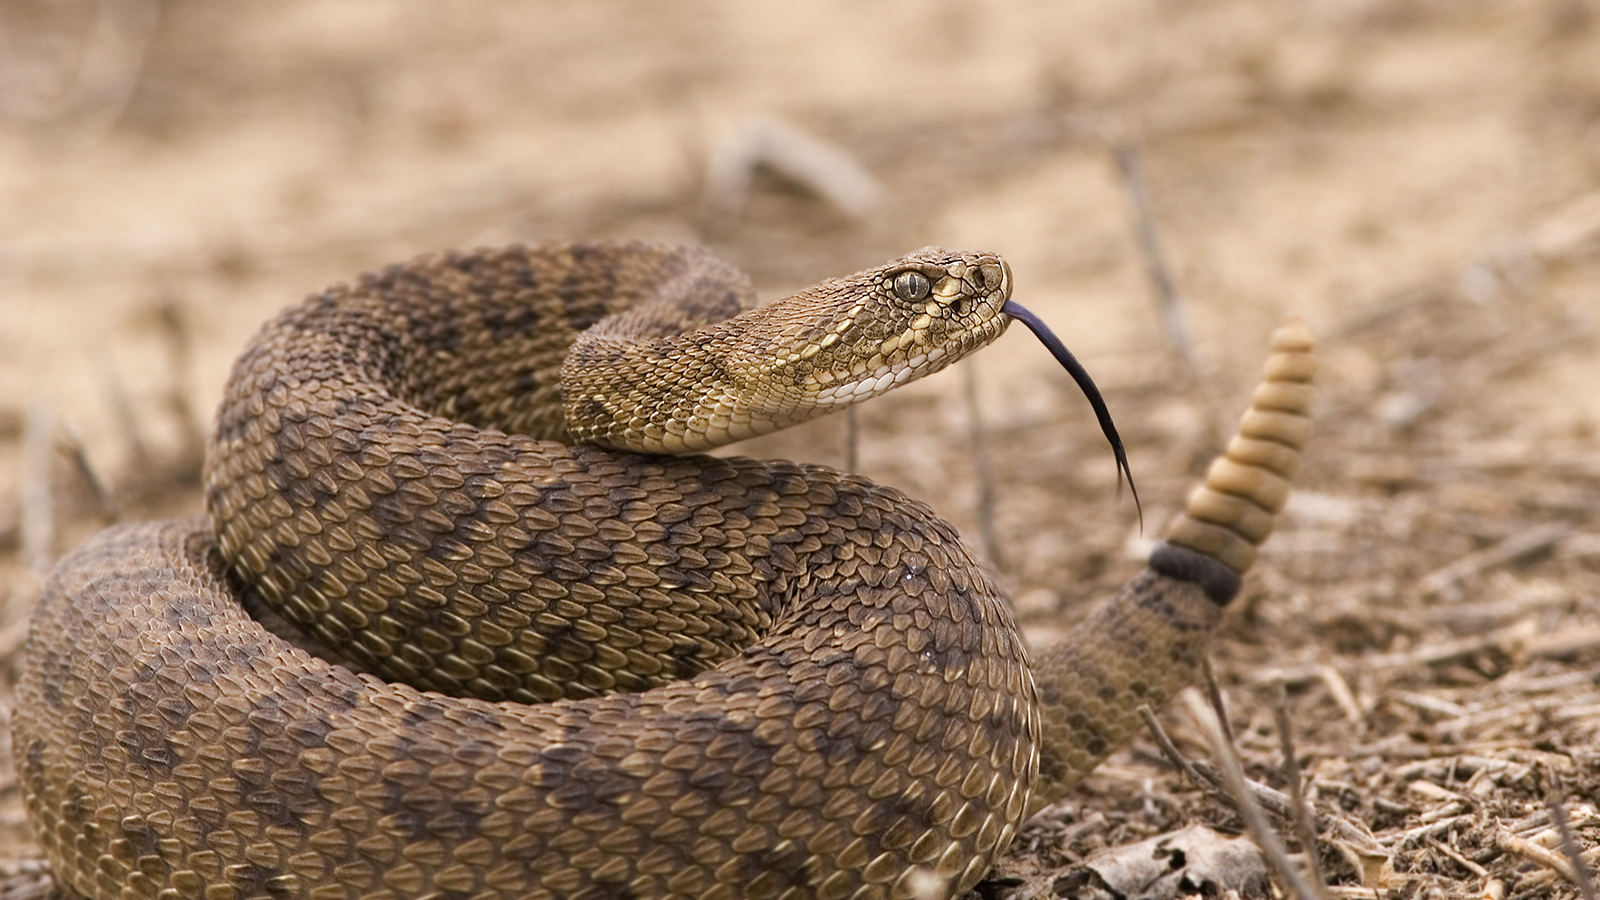 Rattlesnake Pictures